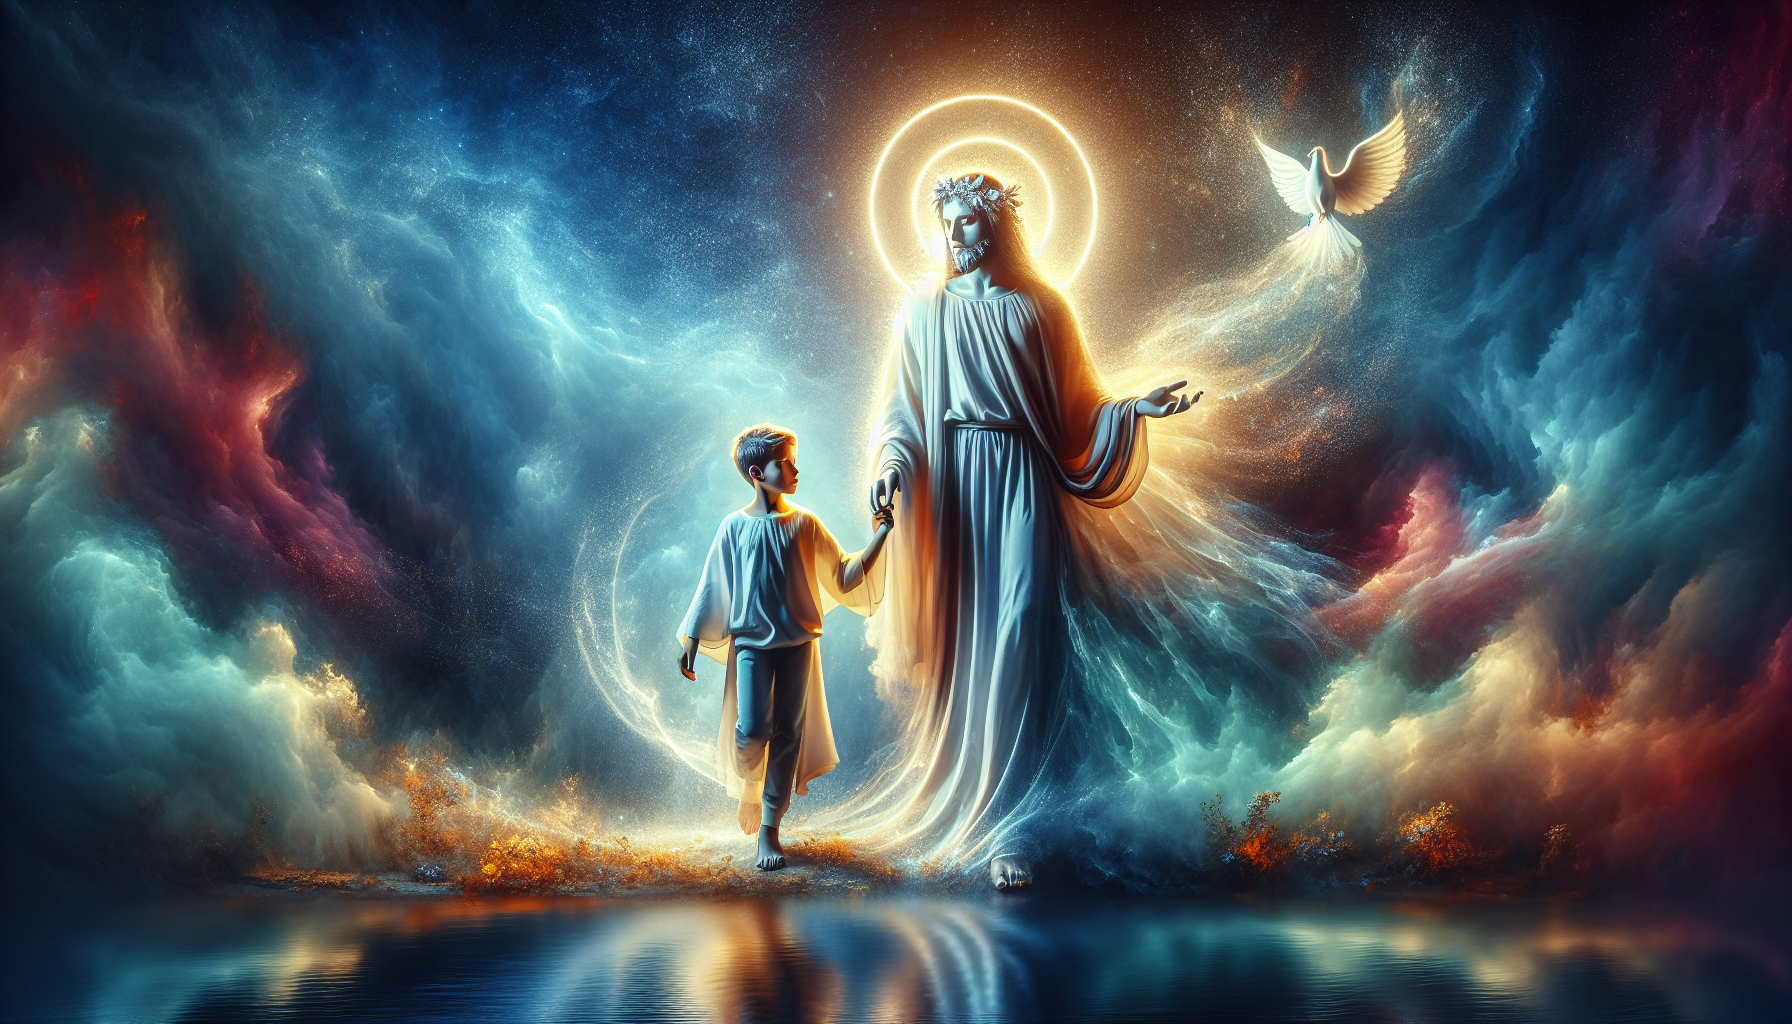 Create an image of a divine figure holding the hand of a young Jesus, exuding a sense of mystery and reverence. The setting should be serene and spiritual, capturing the enigmatic connection between t